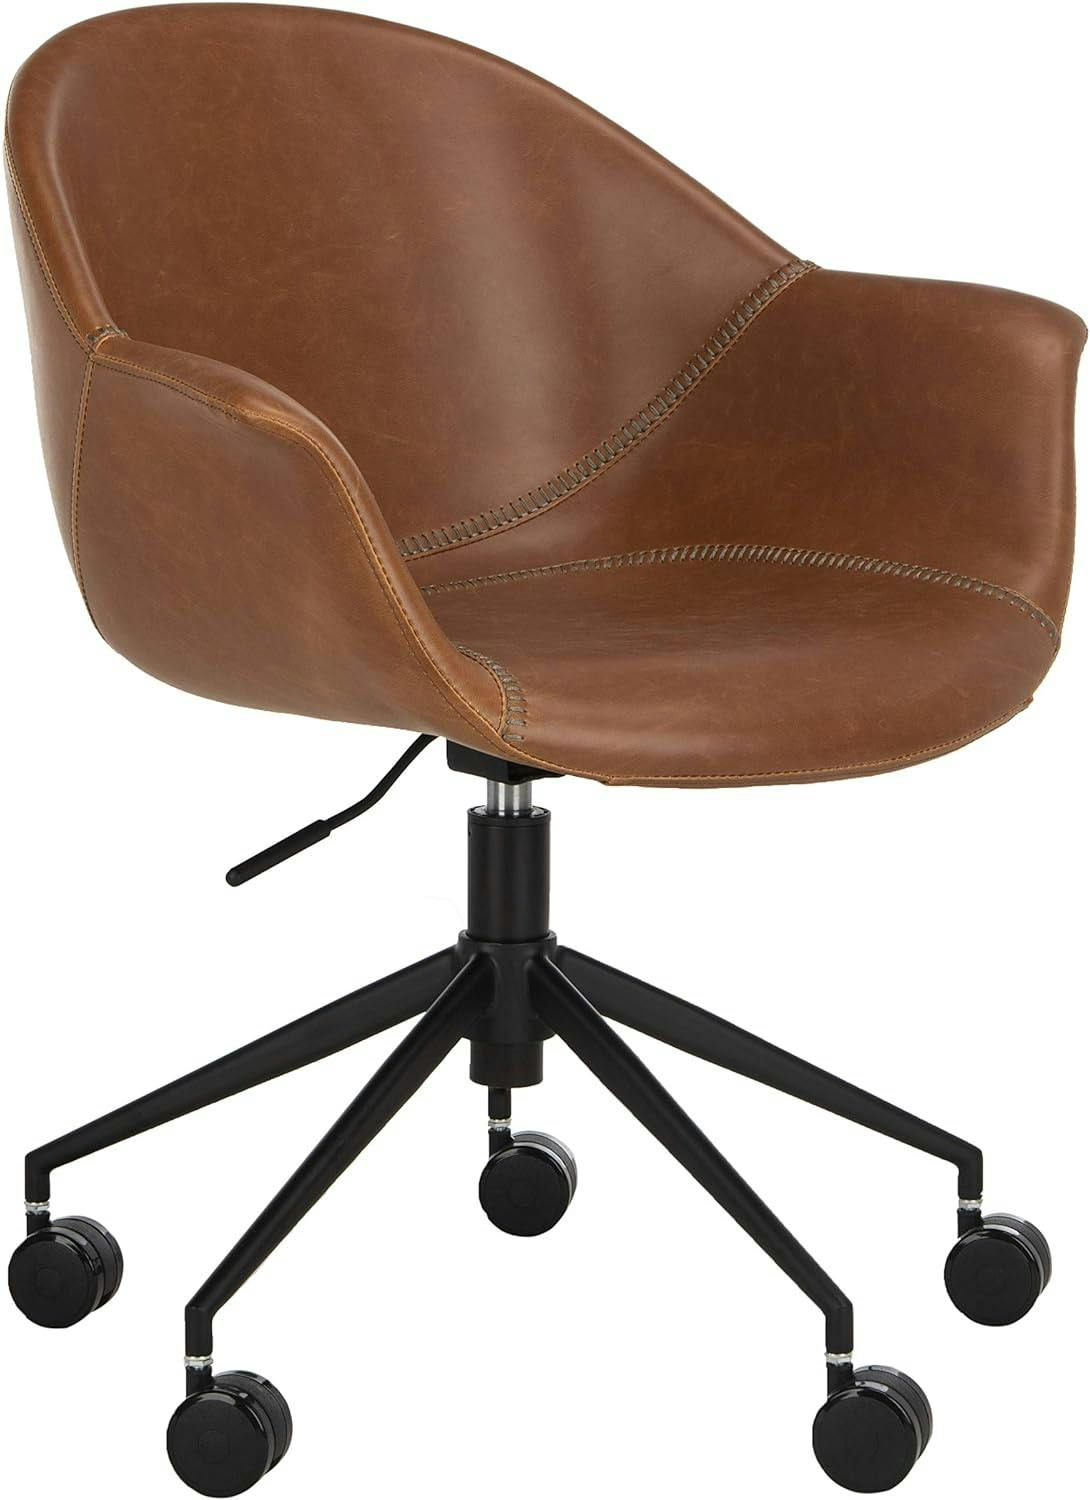 Kealey Cognac Swivel Bicast Leather Office Chair